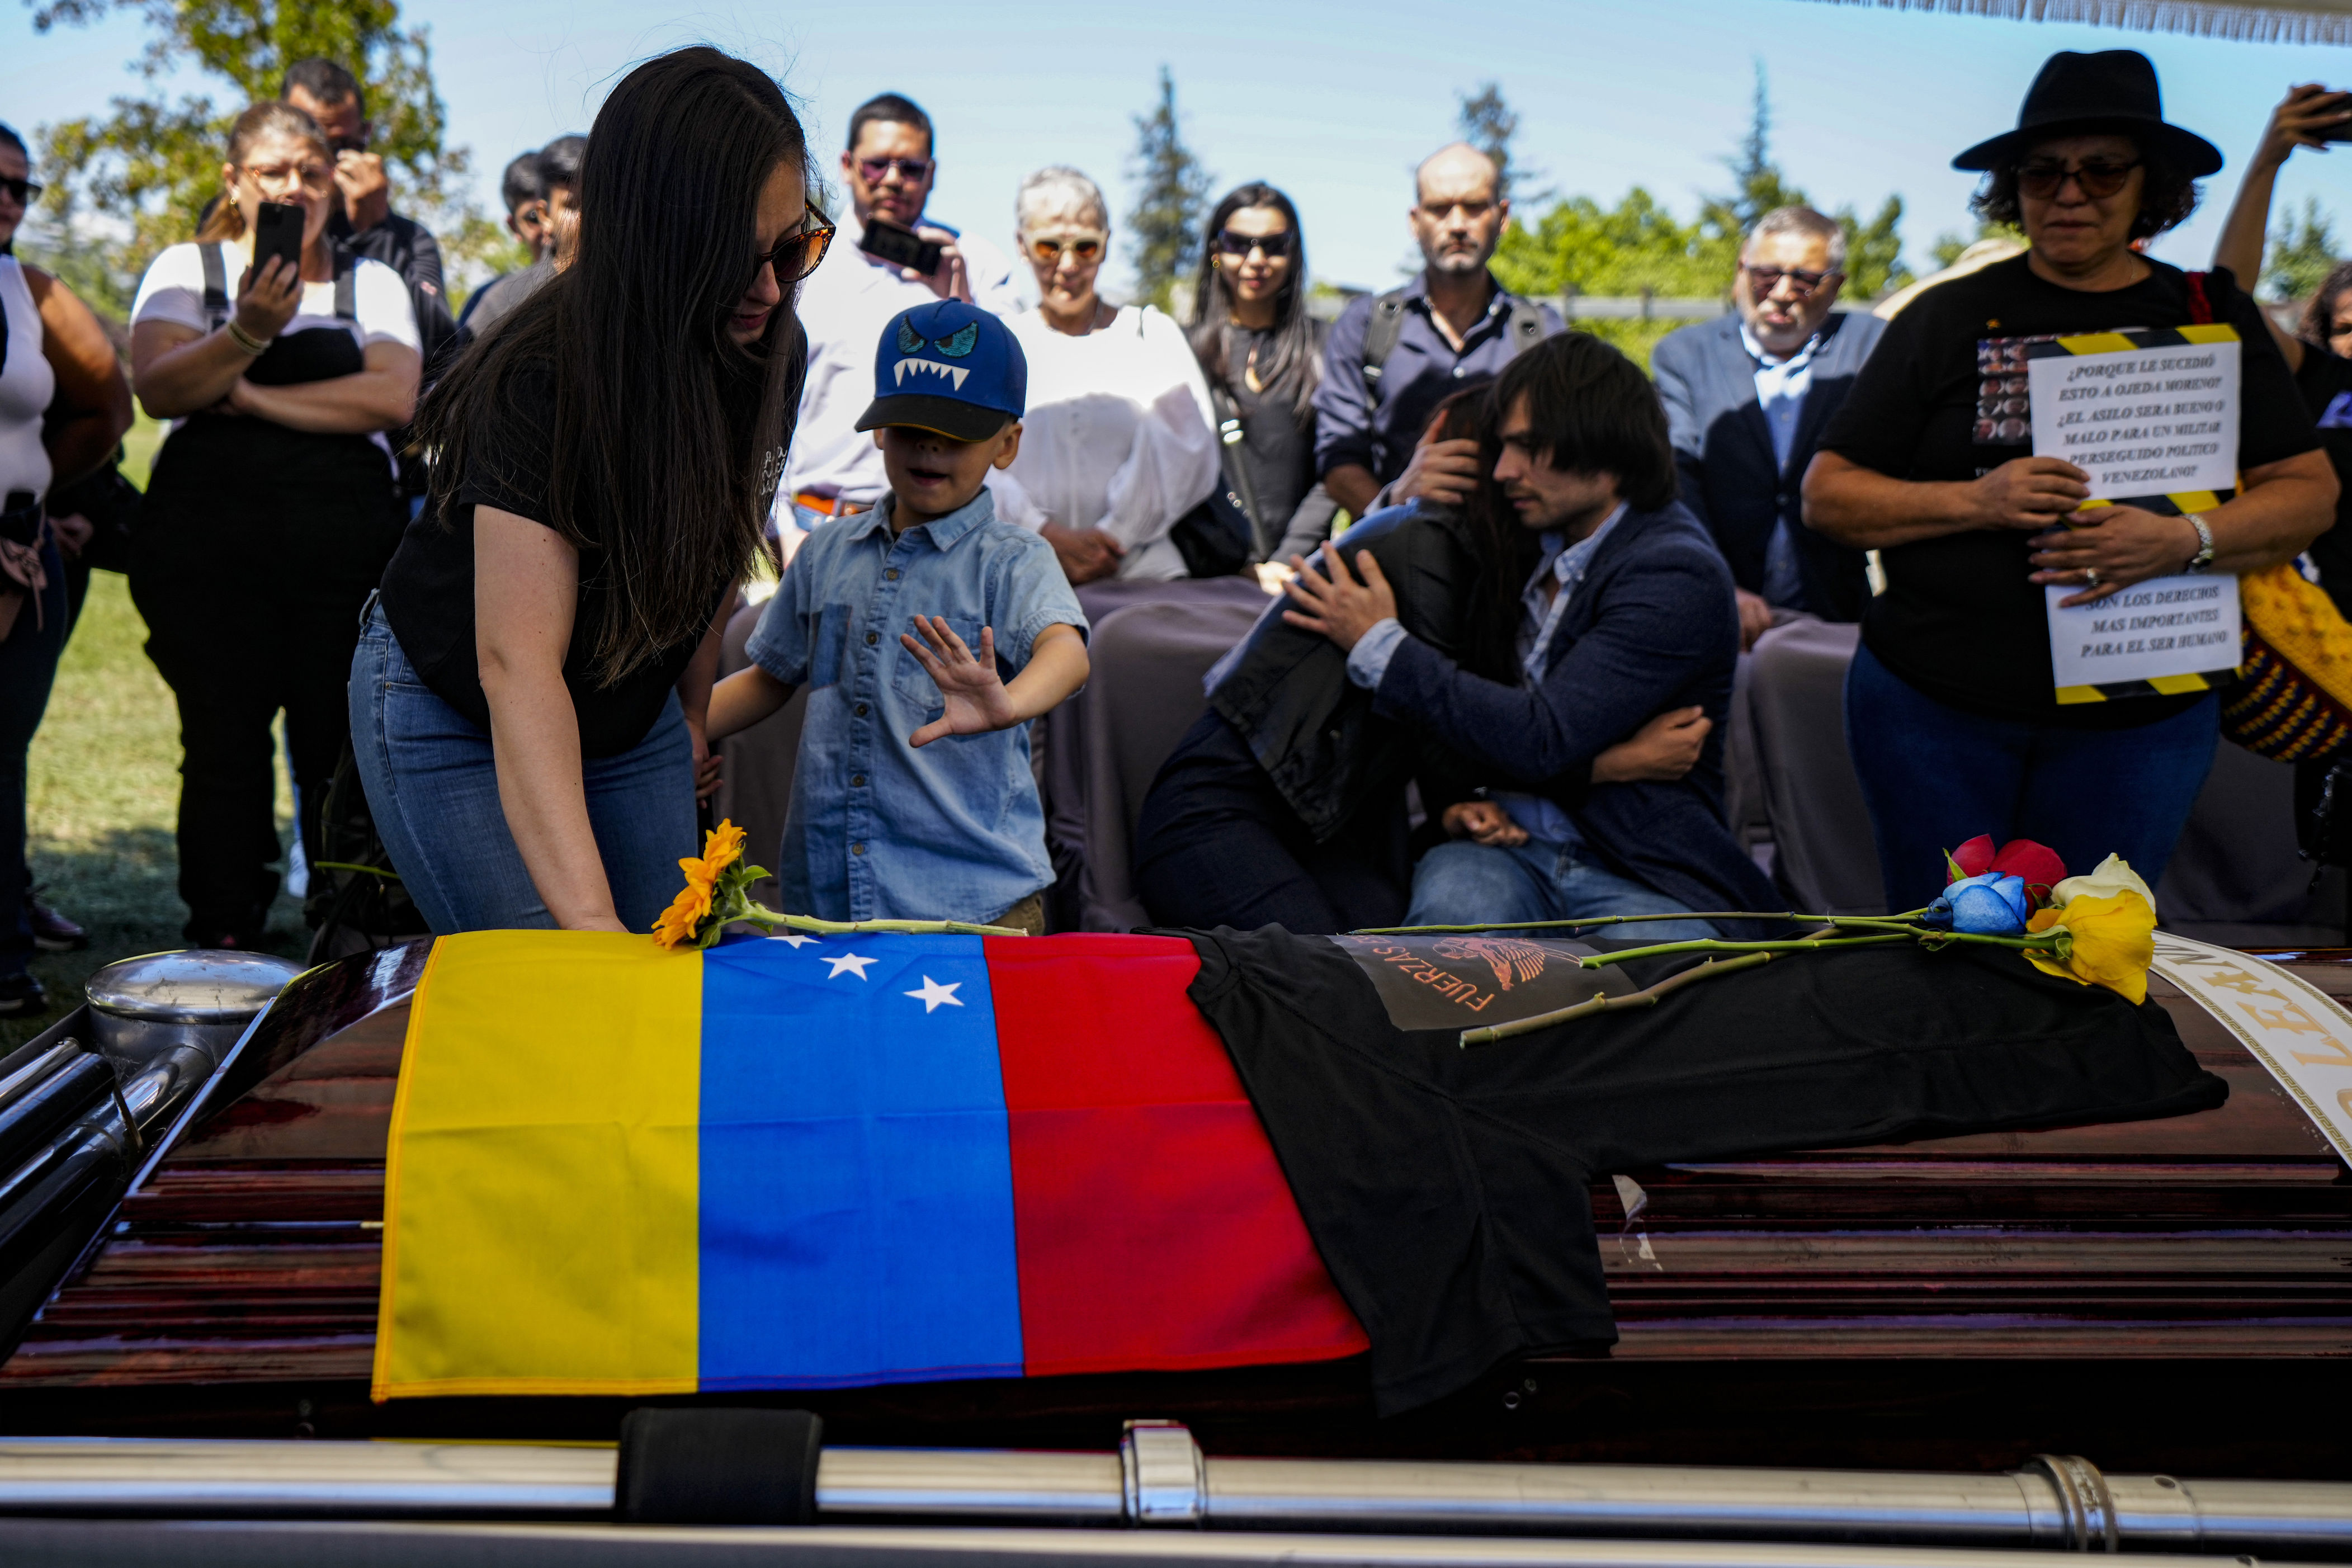 chile calls for the extradition of venezuelans after dissident’s murder